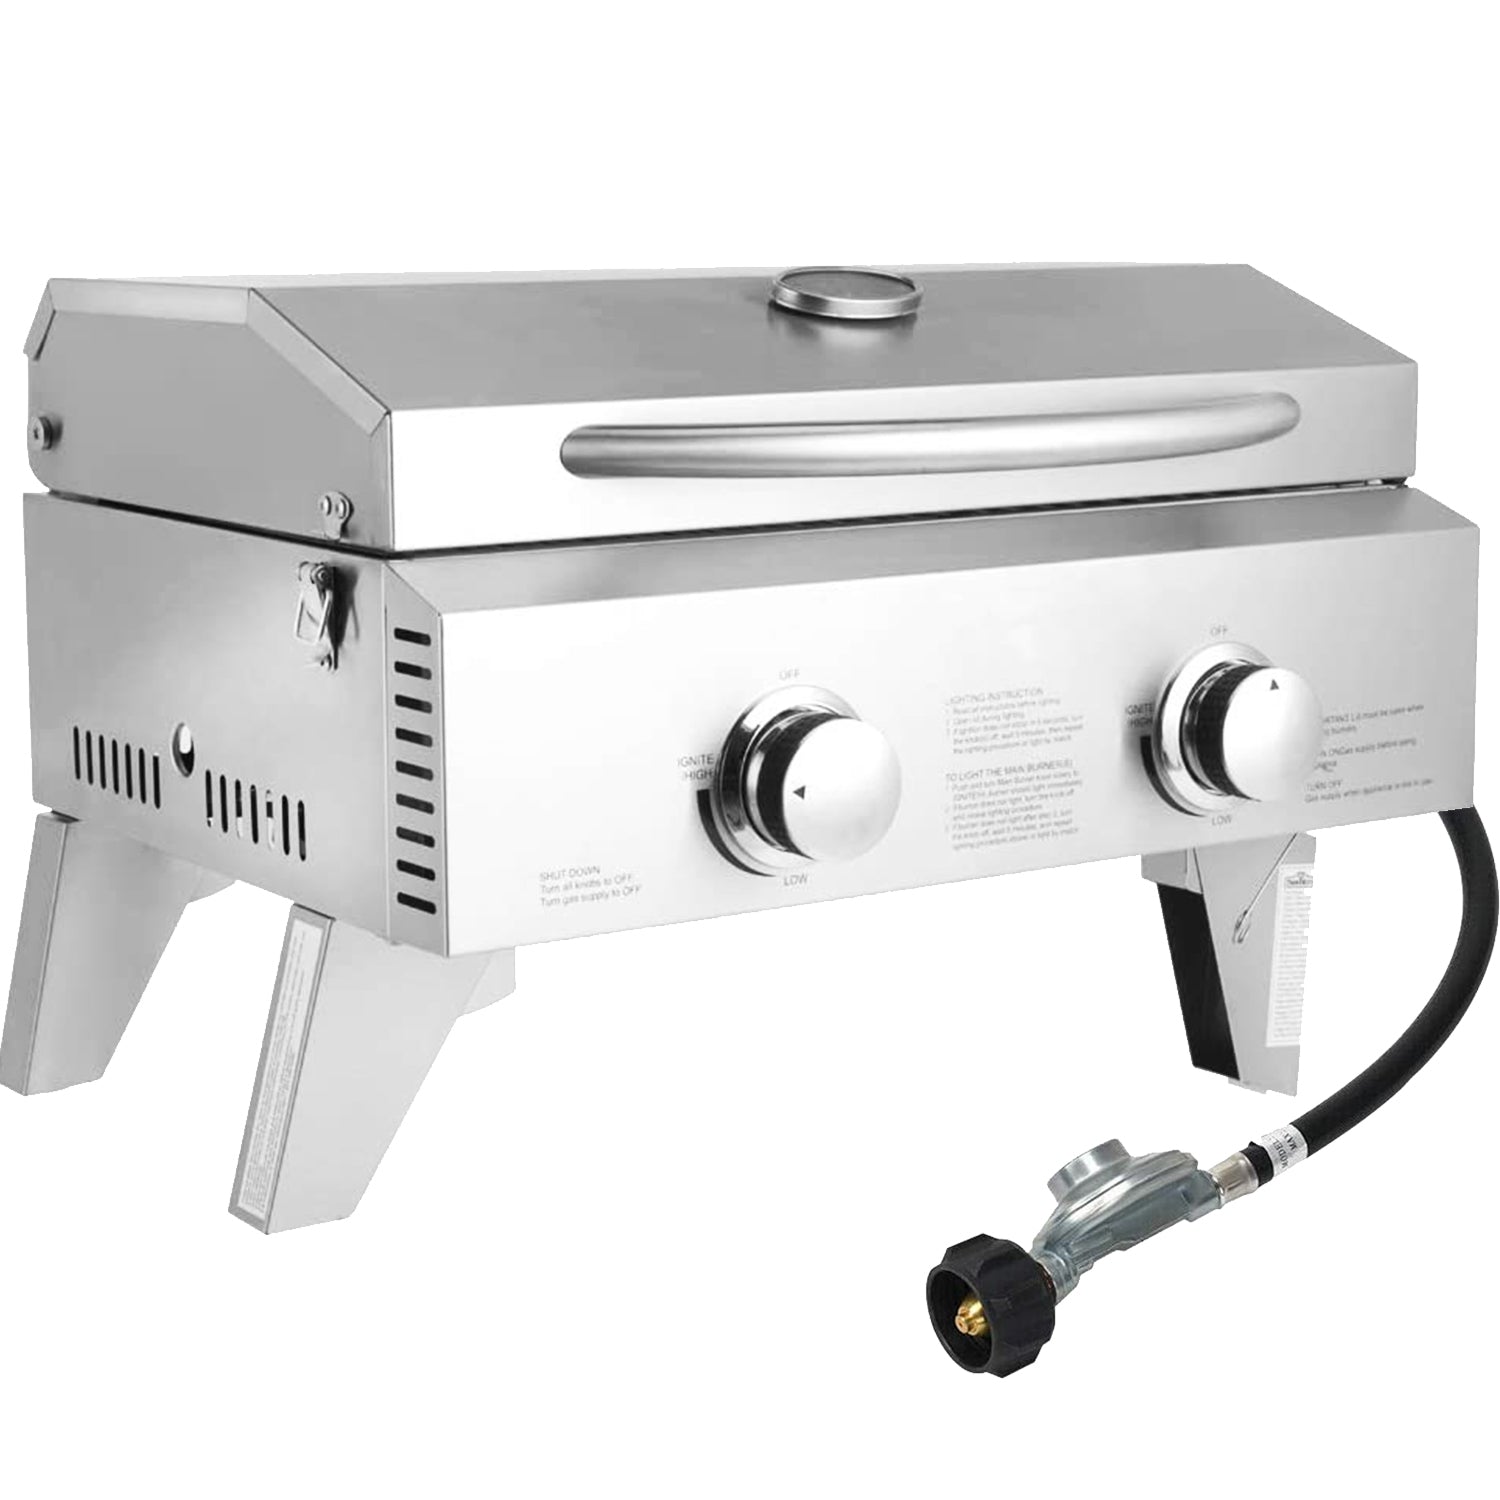 2 Burner Tabletop Propane Gas Grill Stainless Steel Outdoor BBQ Camping  Griddle